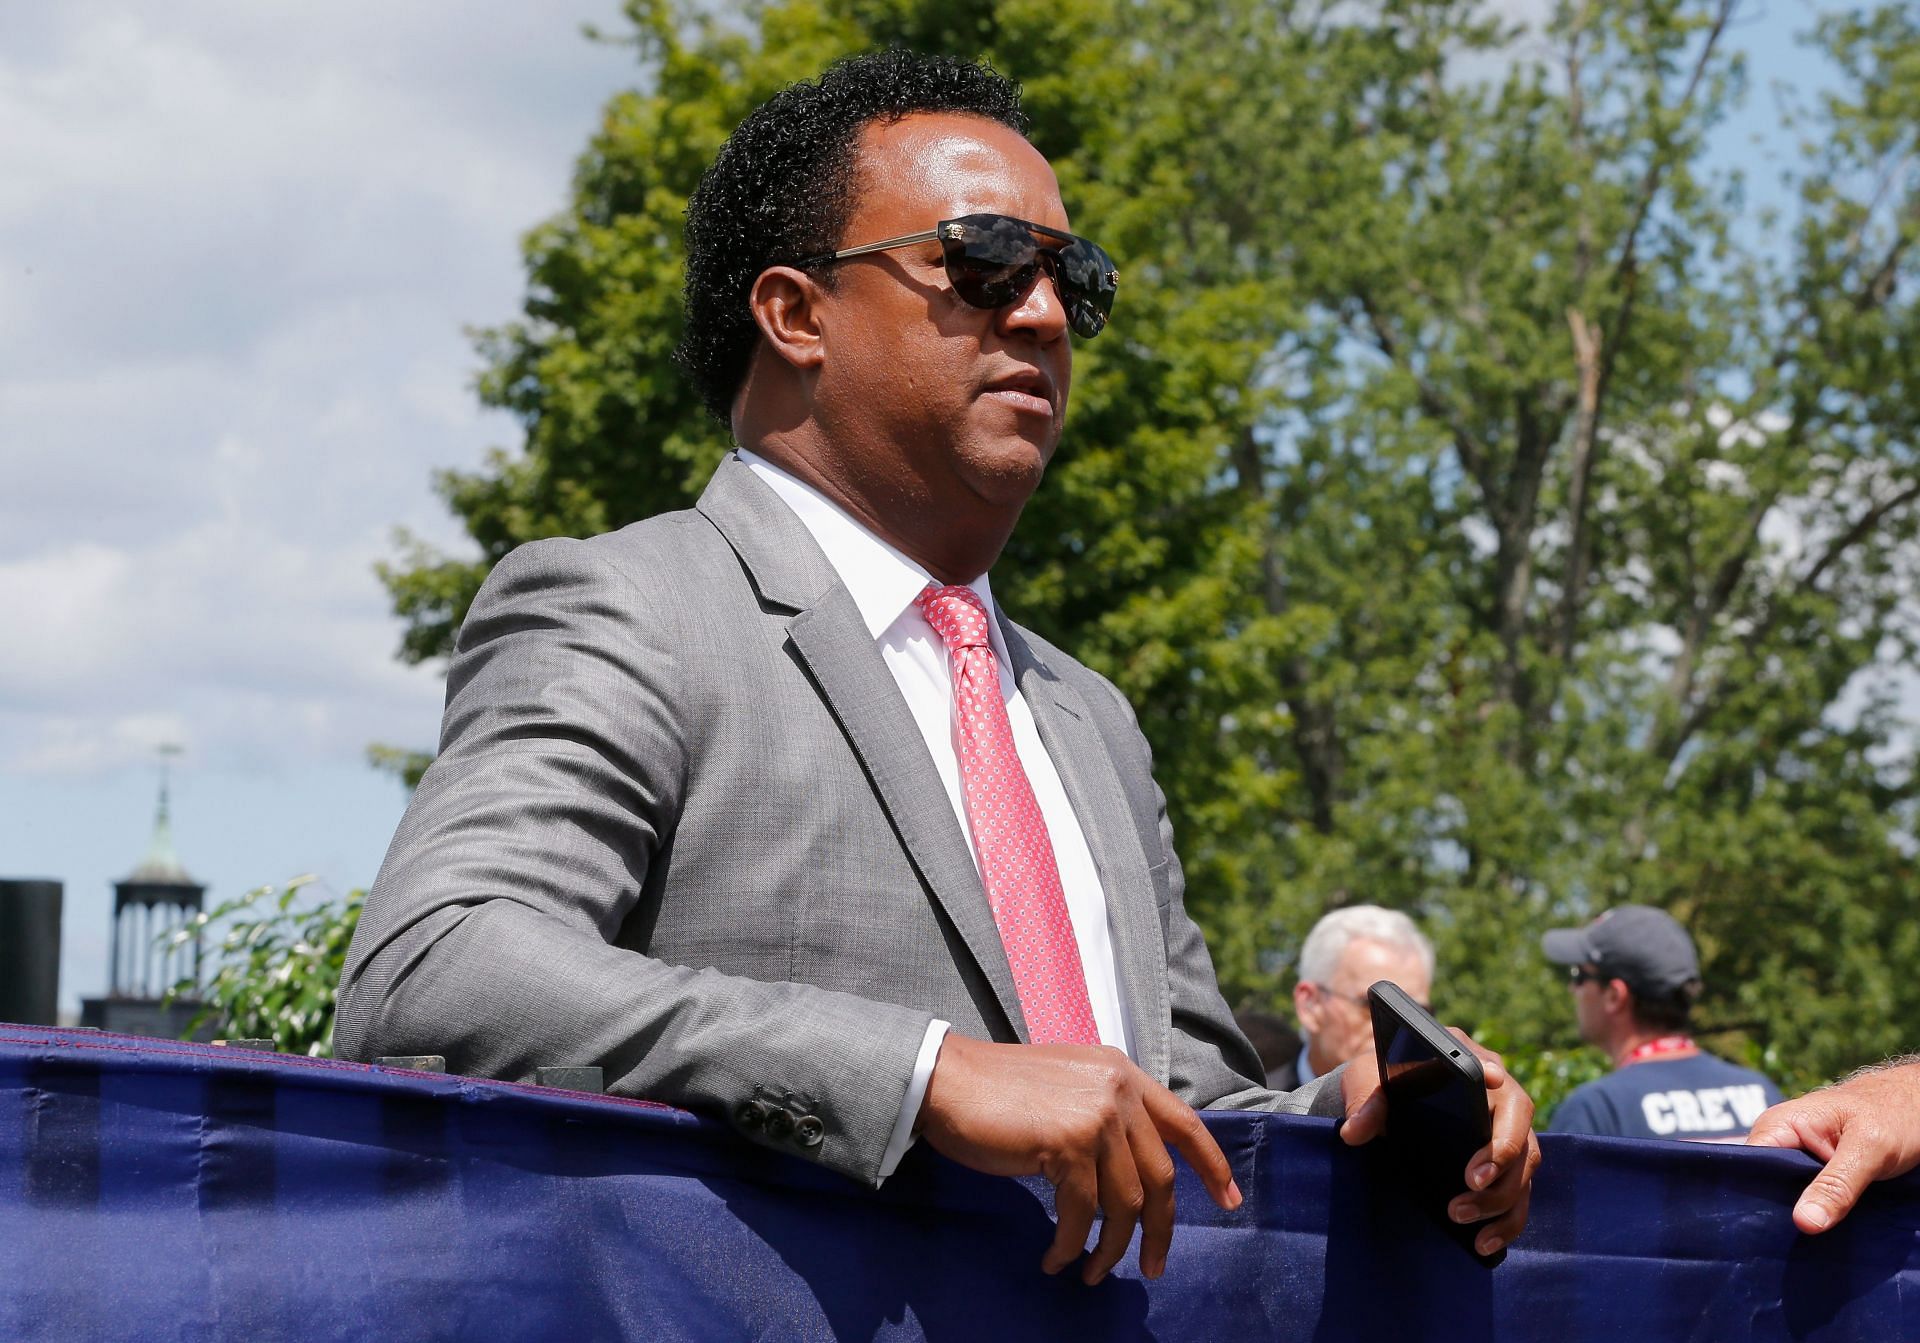 Pedro Martinez played for the Red Sox from 1998 to 2004